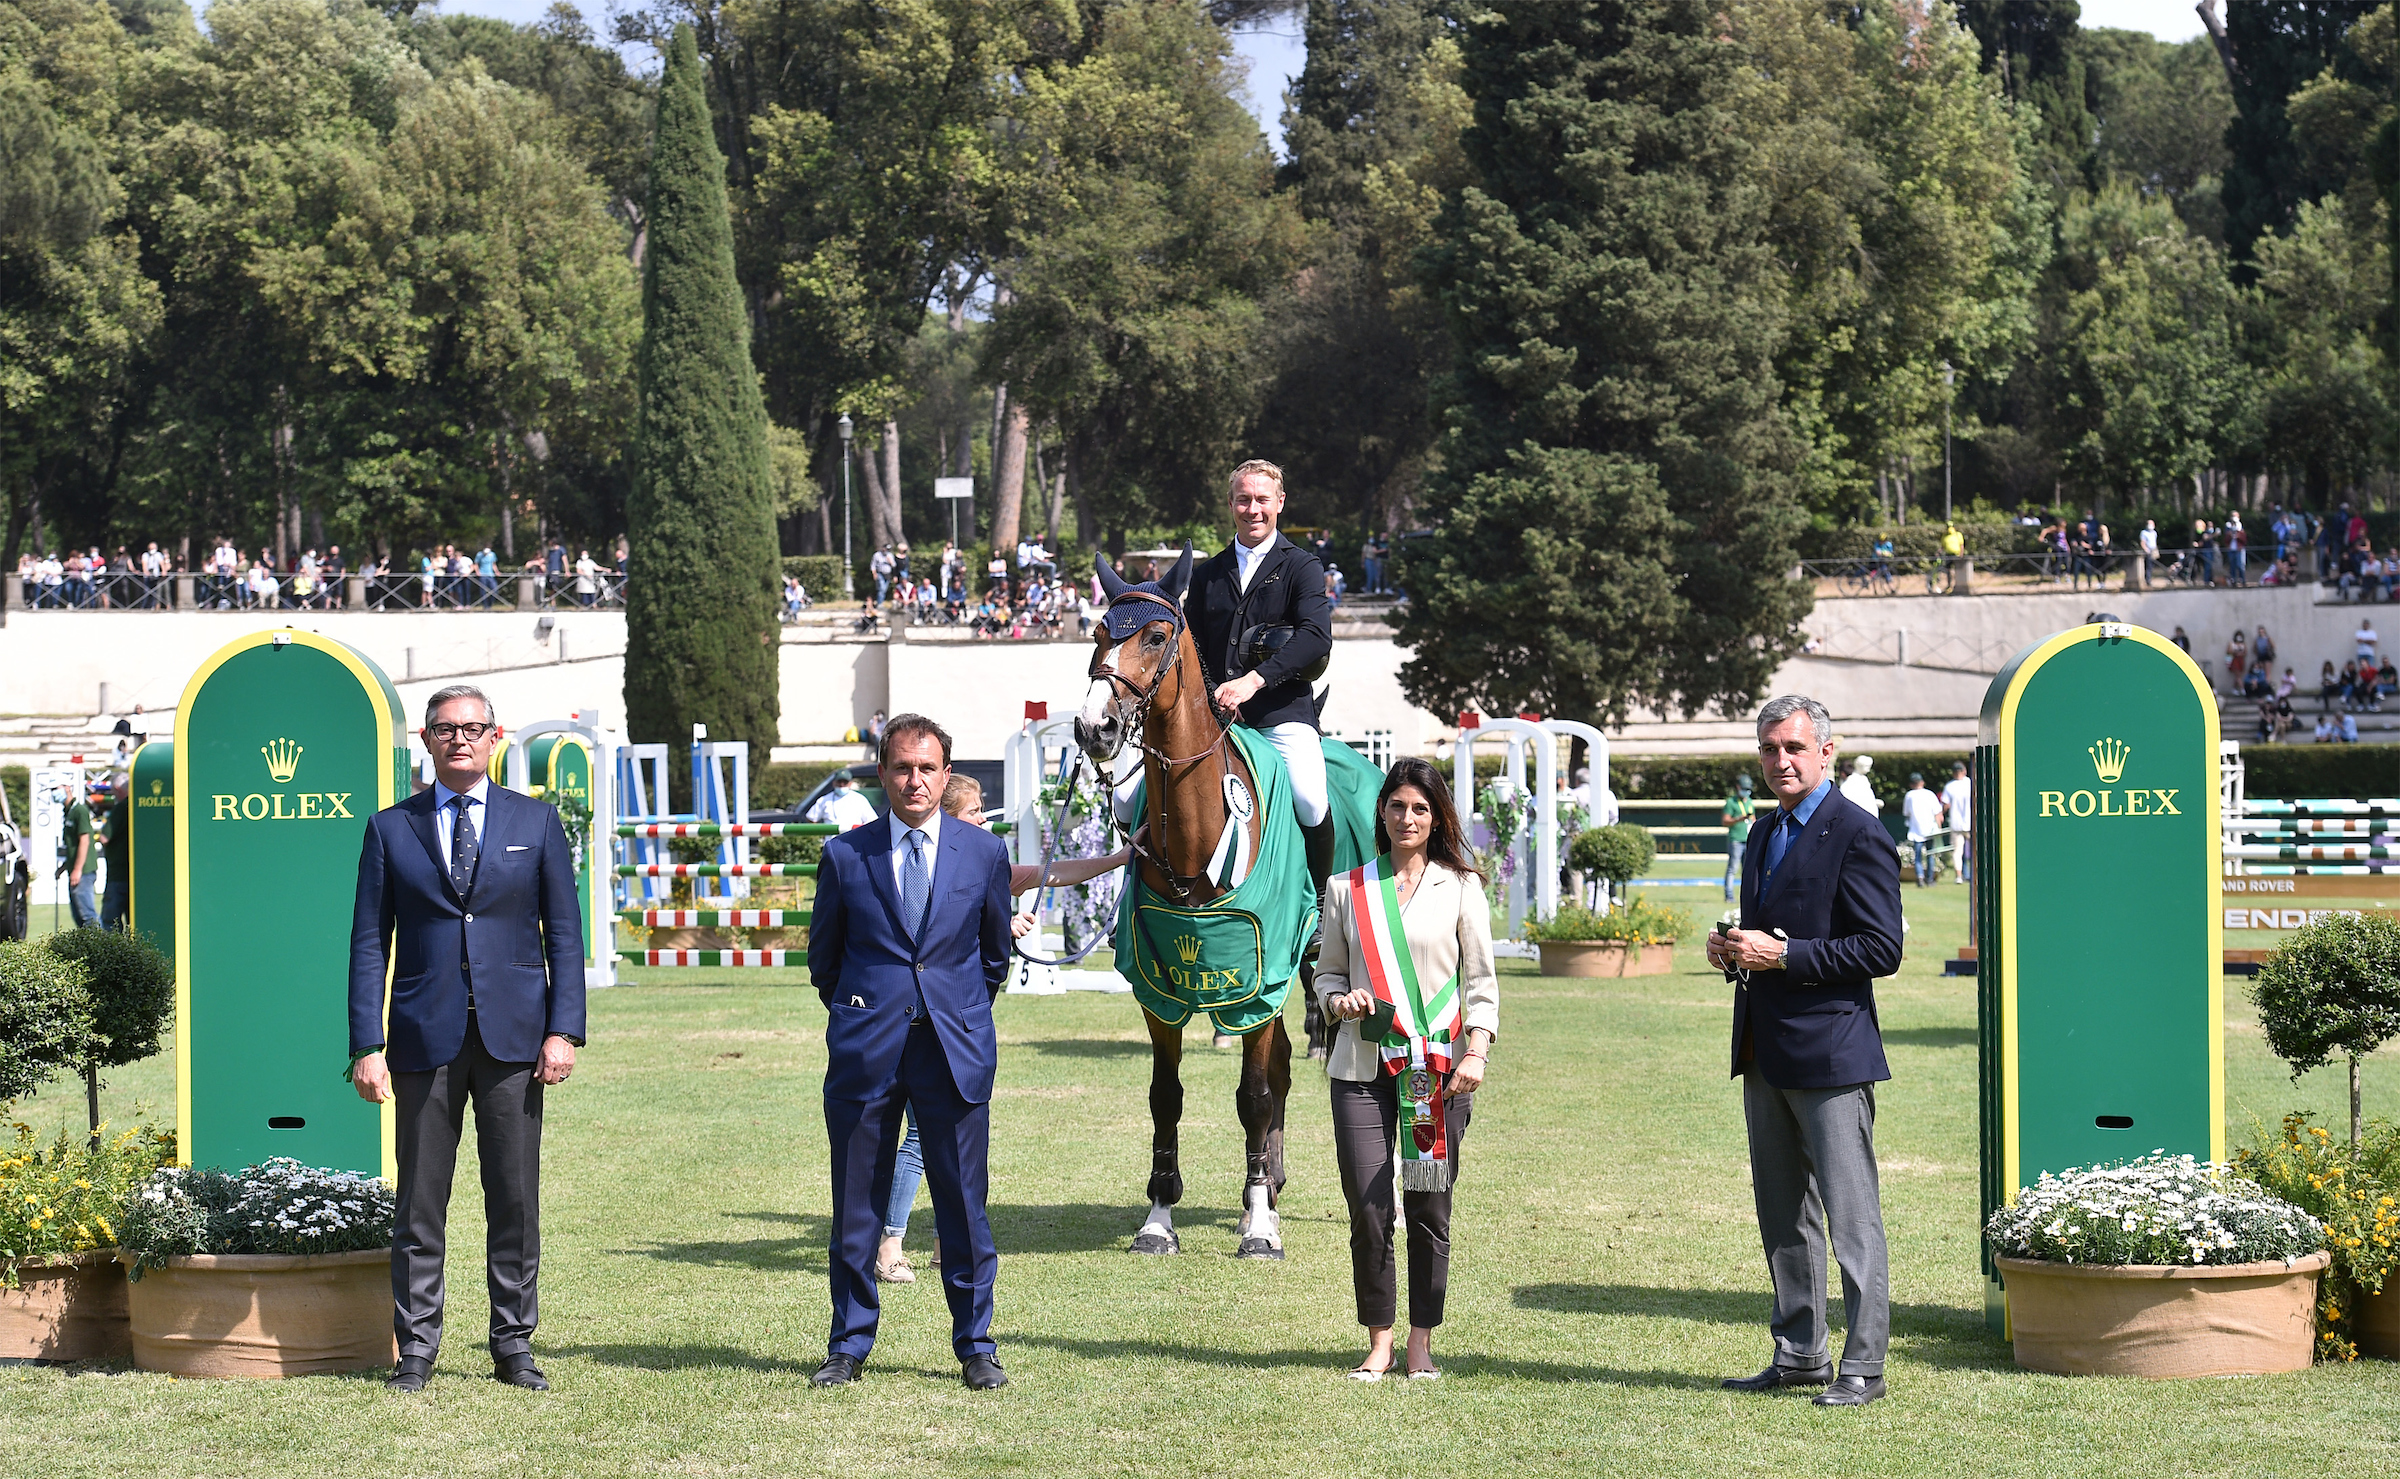 Will wins the one they all want - the ROLEX Grand Prix of Rome